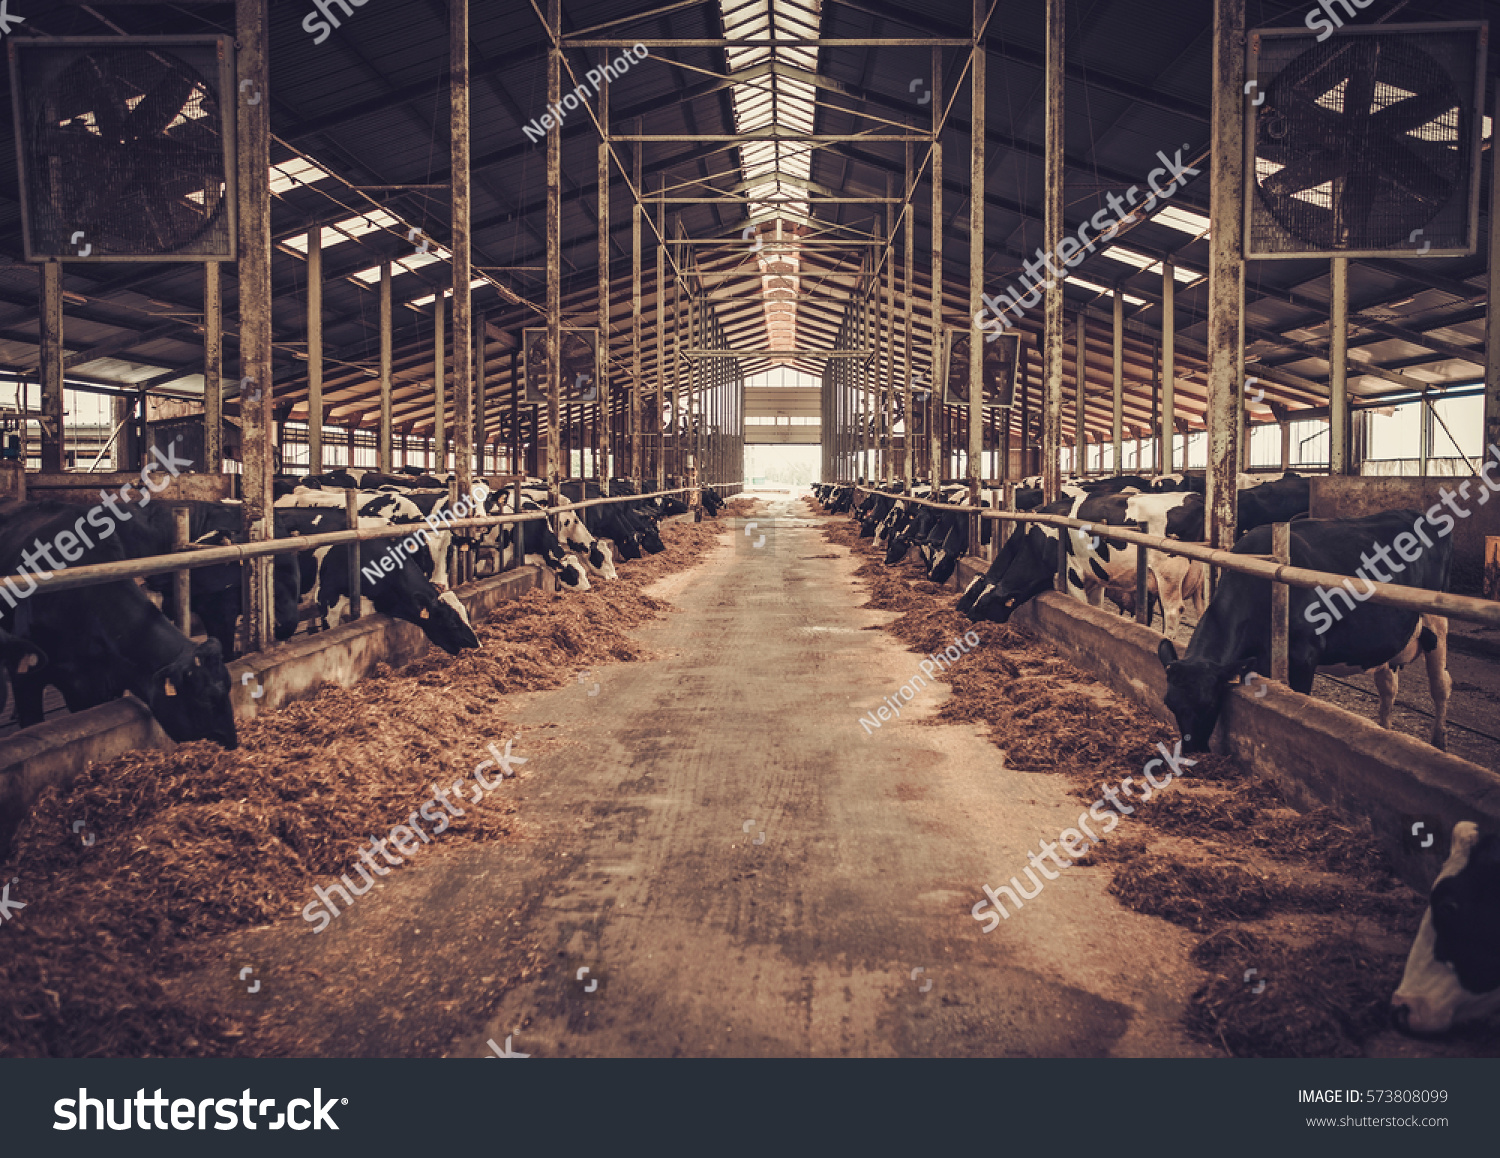 stock-photo-cows-in-the-cowshed-in-dairy-farm-573808099.jpg